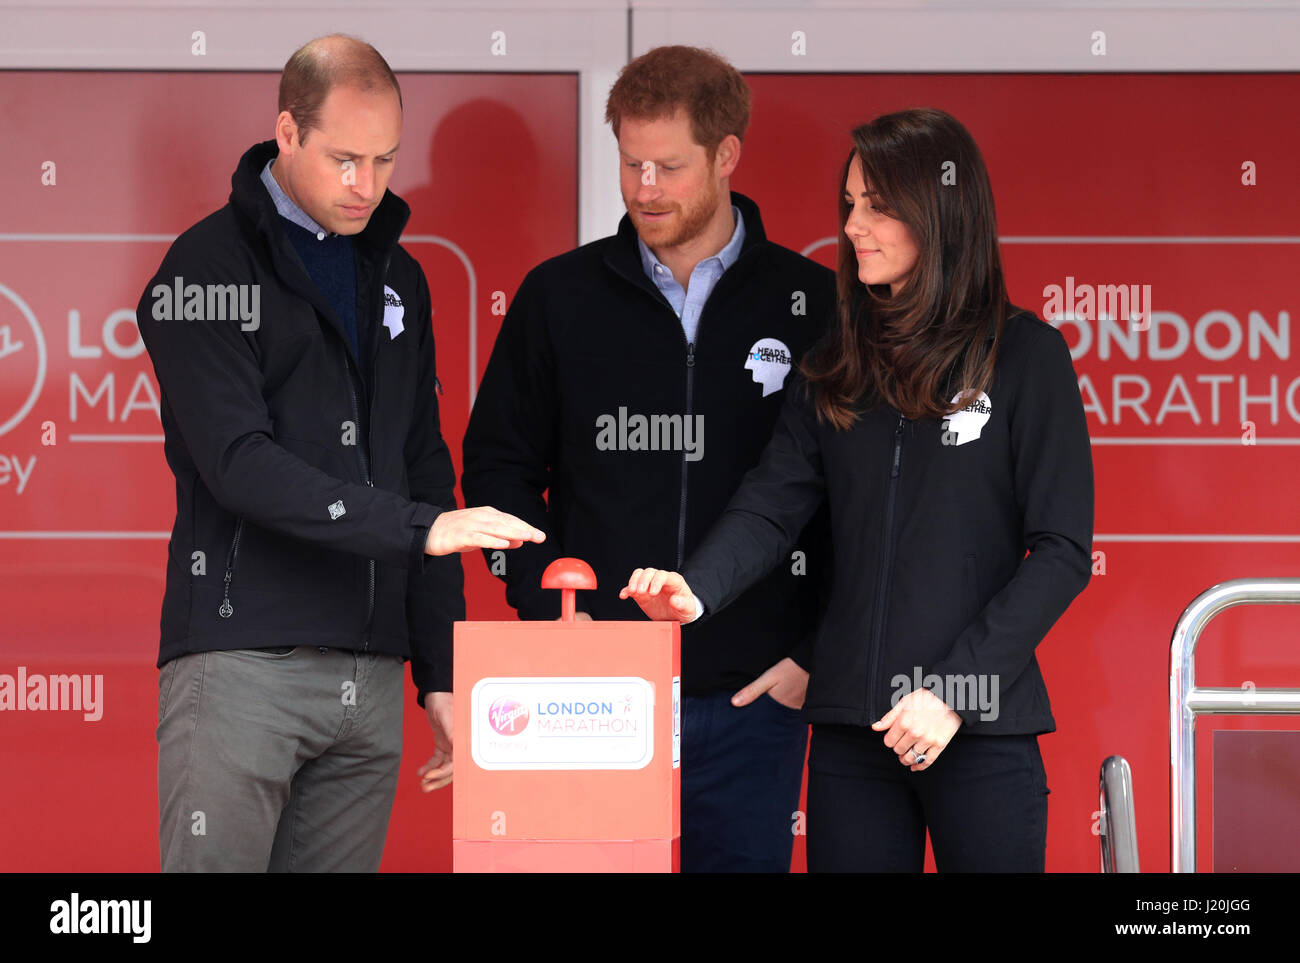 The Duke of Cambridge (left), Prince Harry (centre) and the Duchess of Cambridge at the start line of the Virgin Money London Marathon, London. PRESS ASSOCIATION. Picture date: Sunday April 23, 2017. See PA story ATHLETICS Marathon. Photo credit should read: Adam Davy/PA Wire Stock Photo